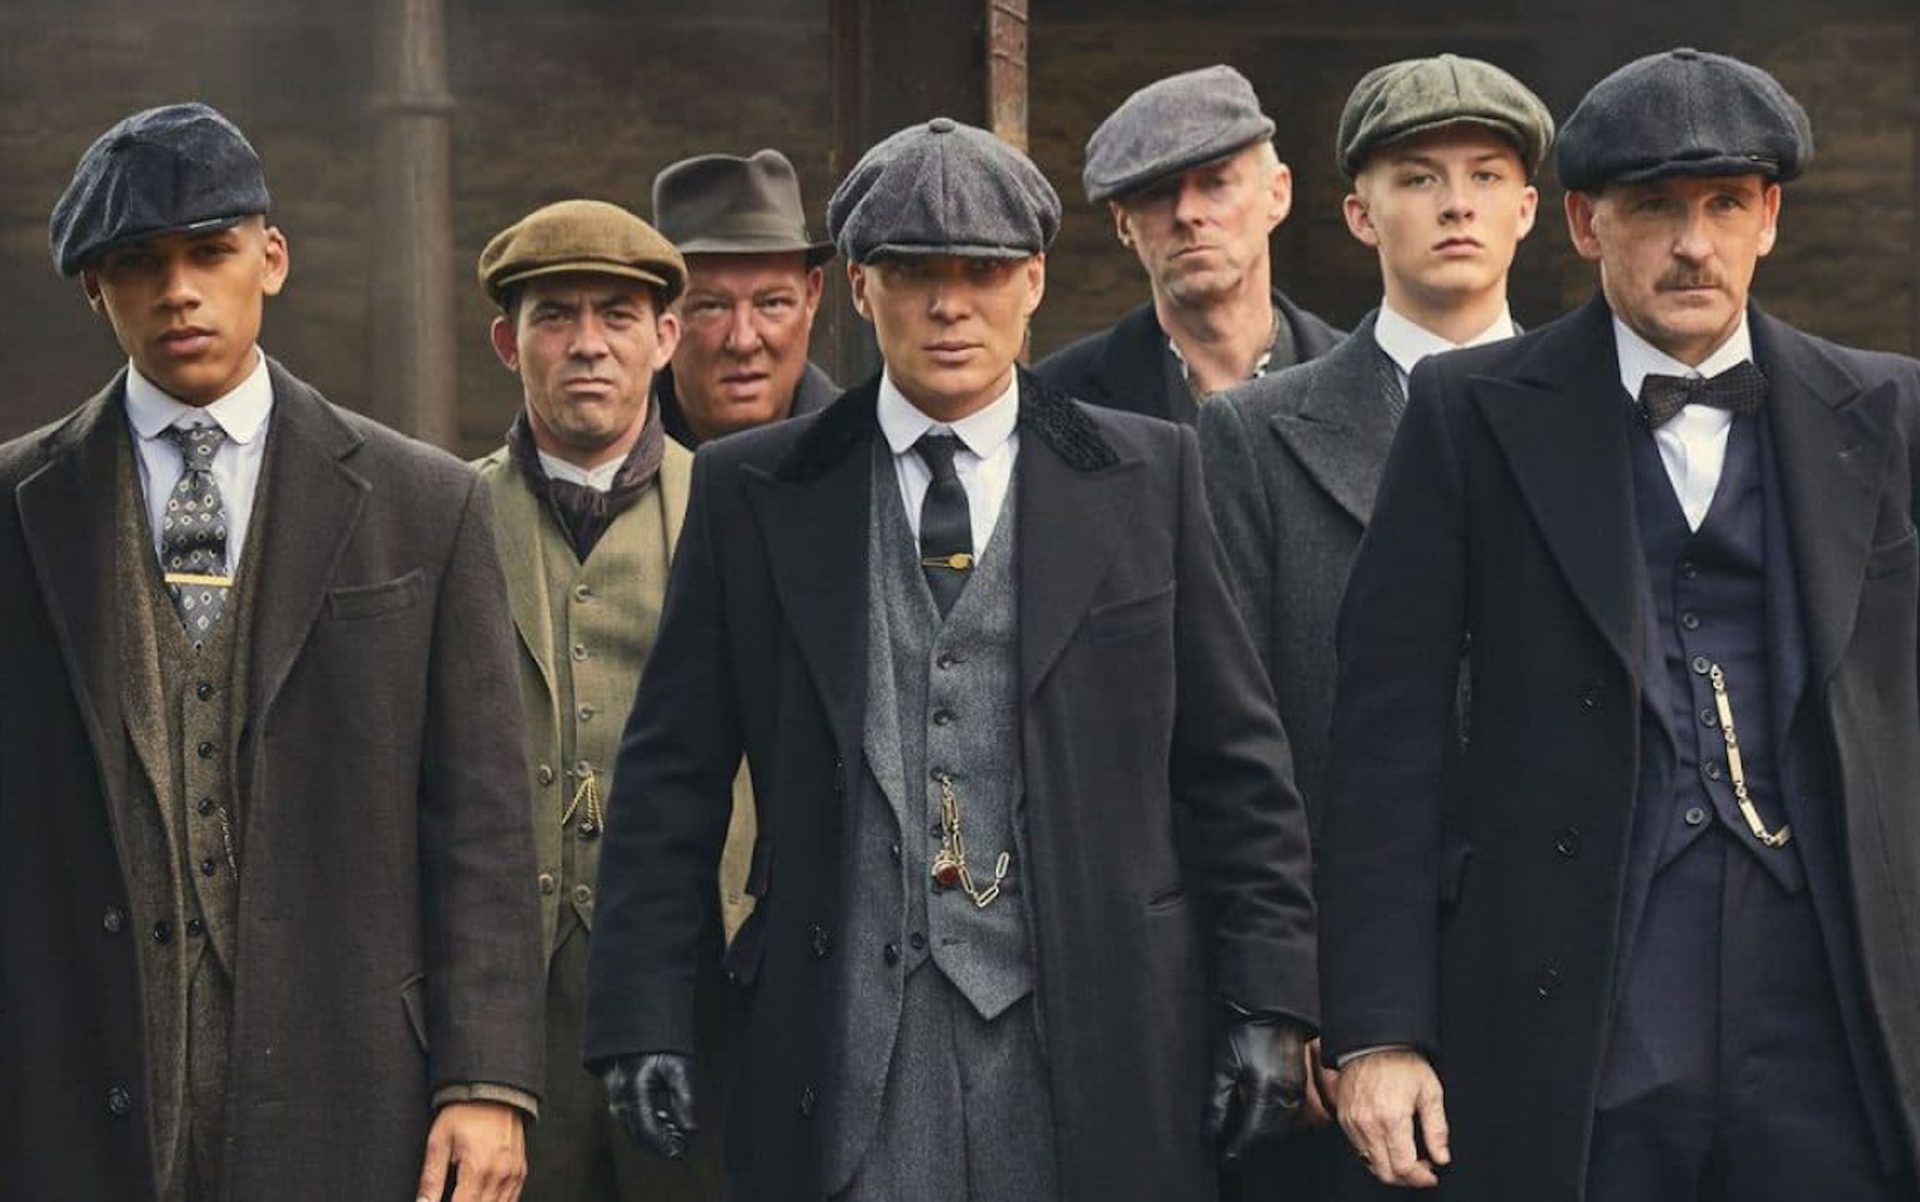 Cillian Murphy torna ad indossare i panni di Tommy Shelby nel film di Peaky Blinders